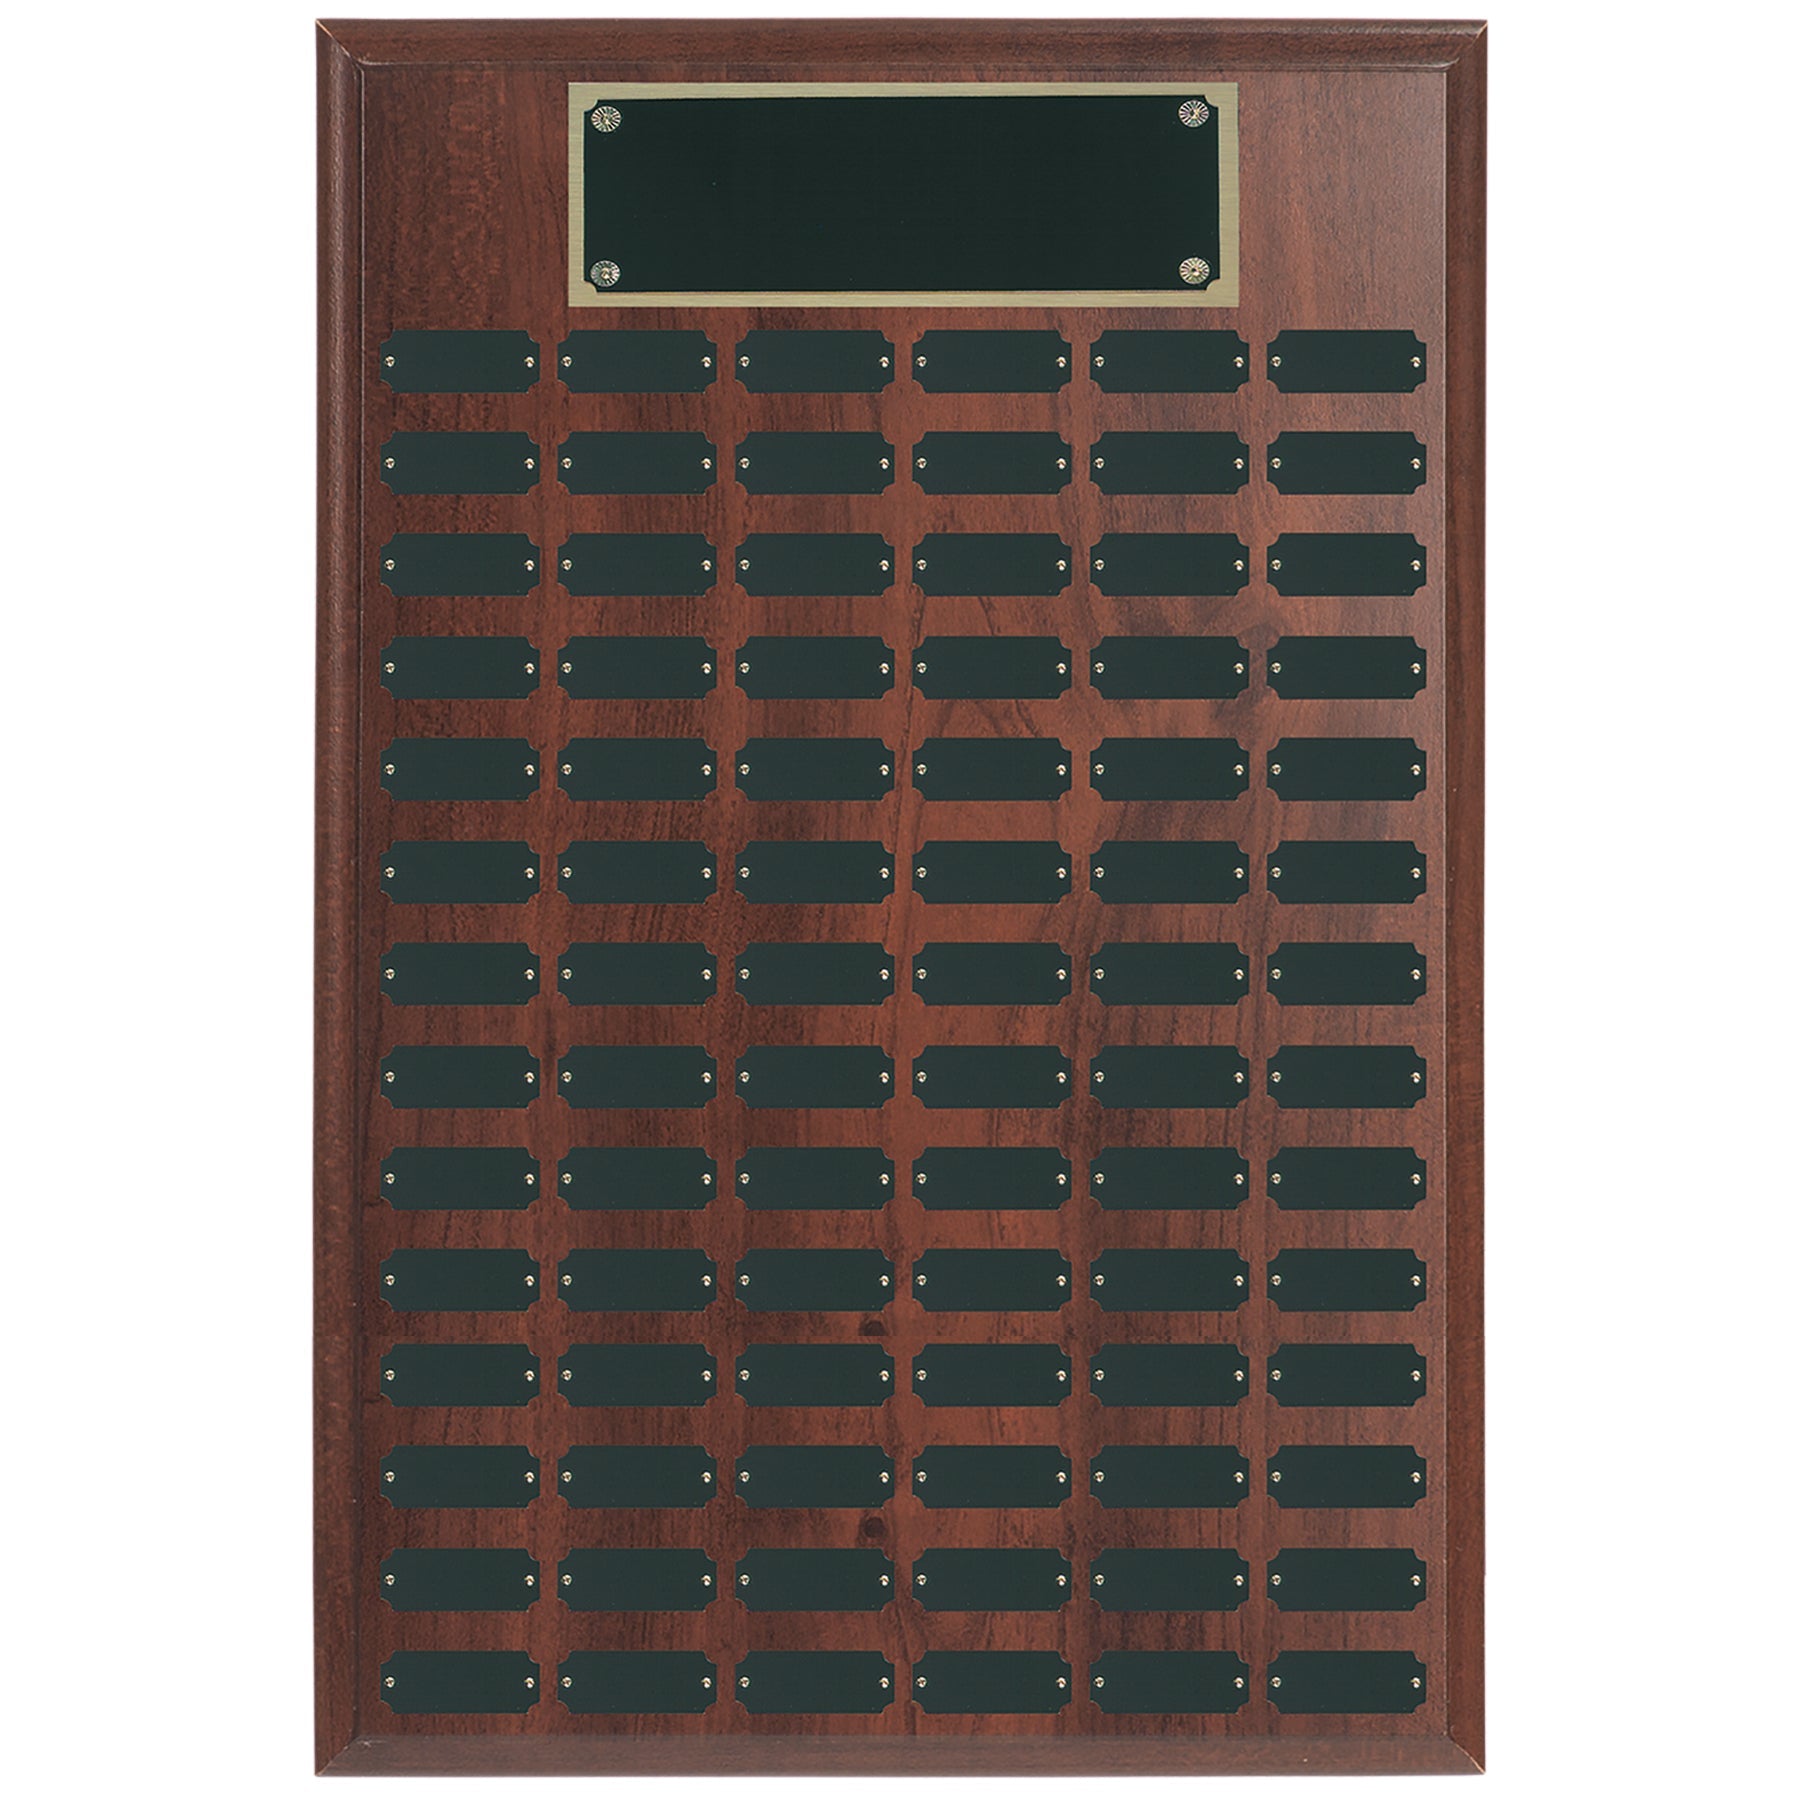 Walnut Completed Perpetual Plaque, 84 Plate, Laser Engraved Perpetual Plaque Craftworks NW 